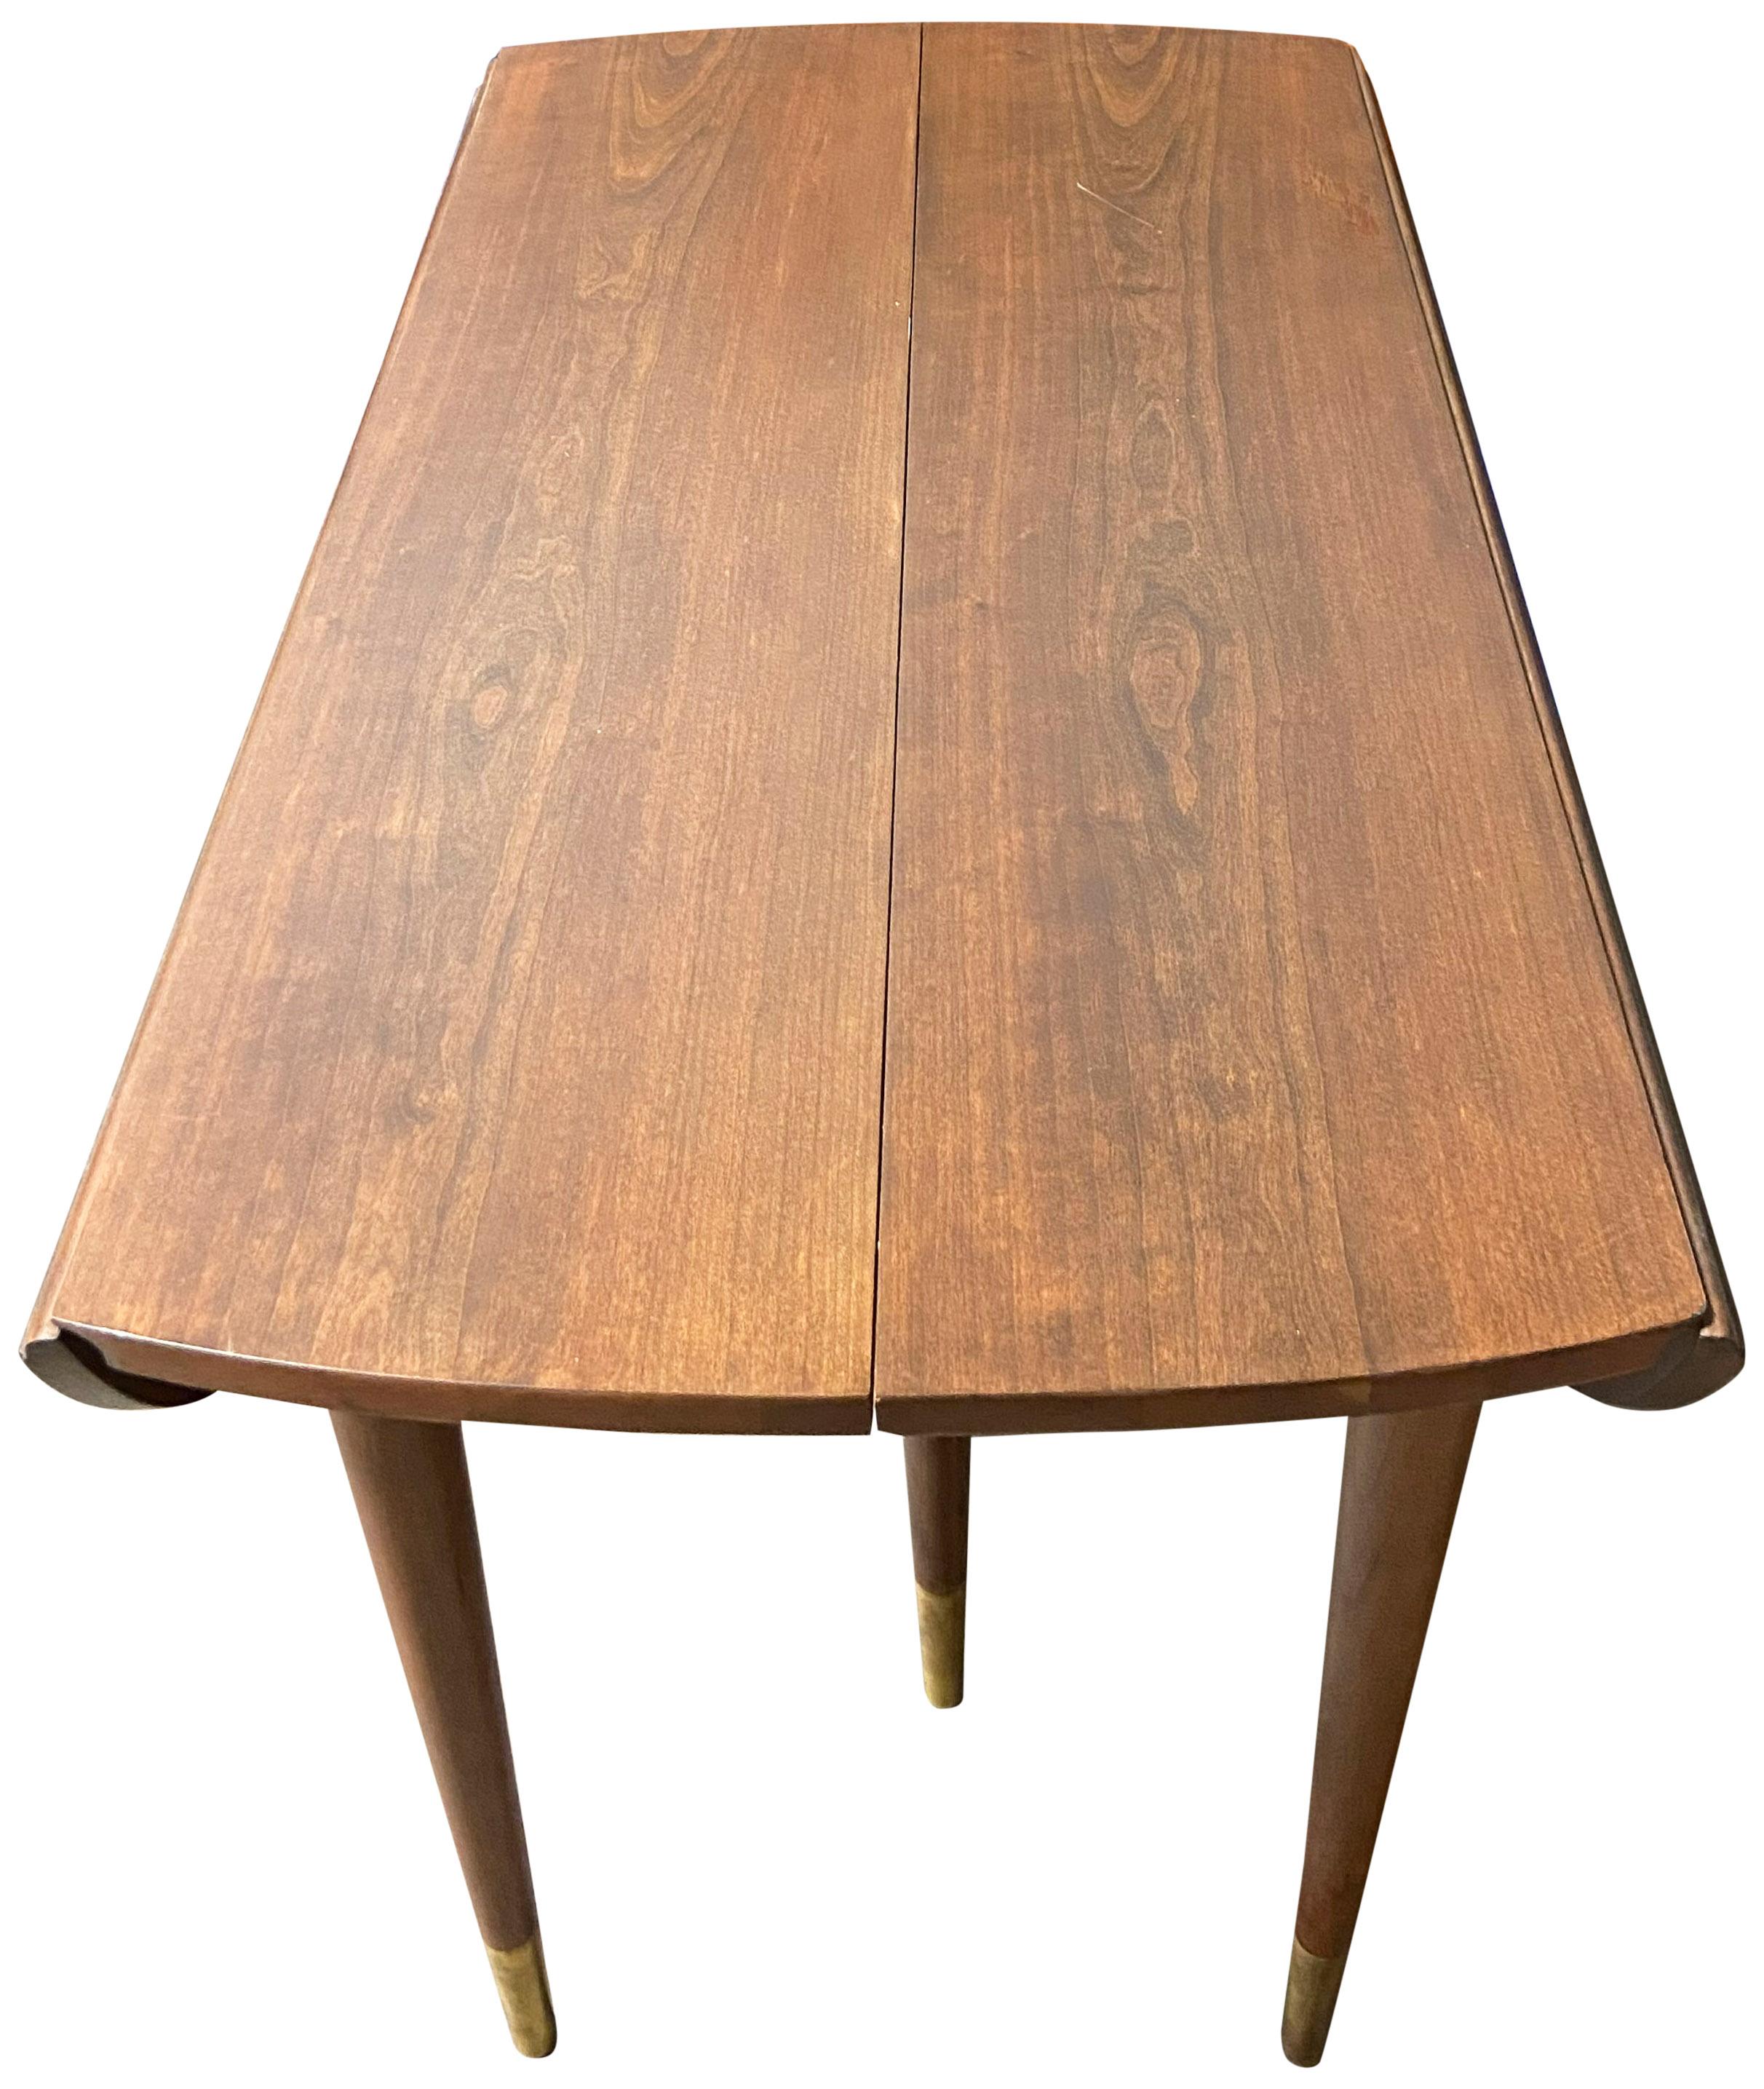 Midcentury Extension Drop-Leaf Dining Table by John Widdicomb 3